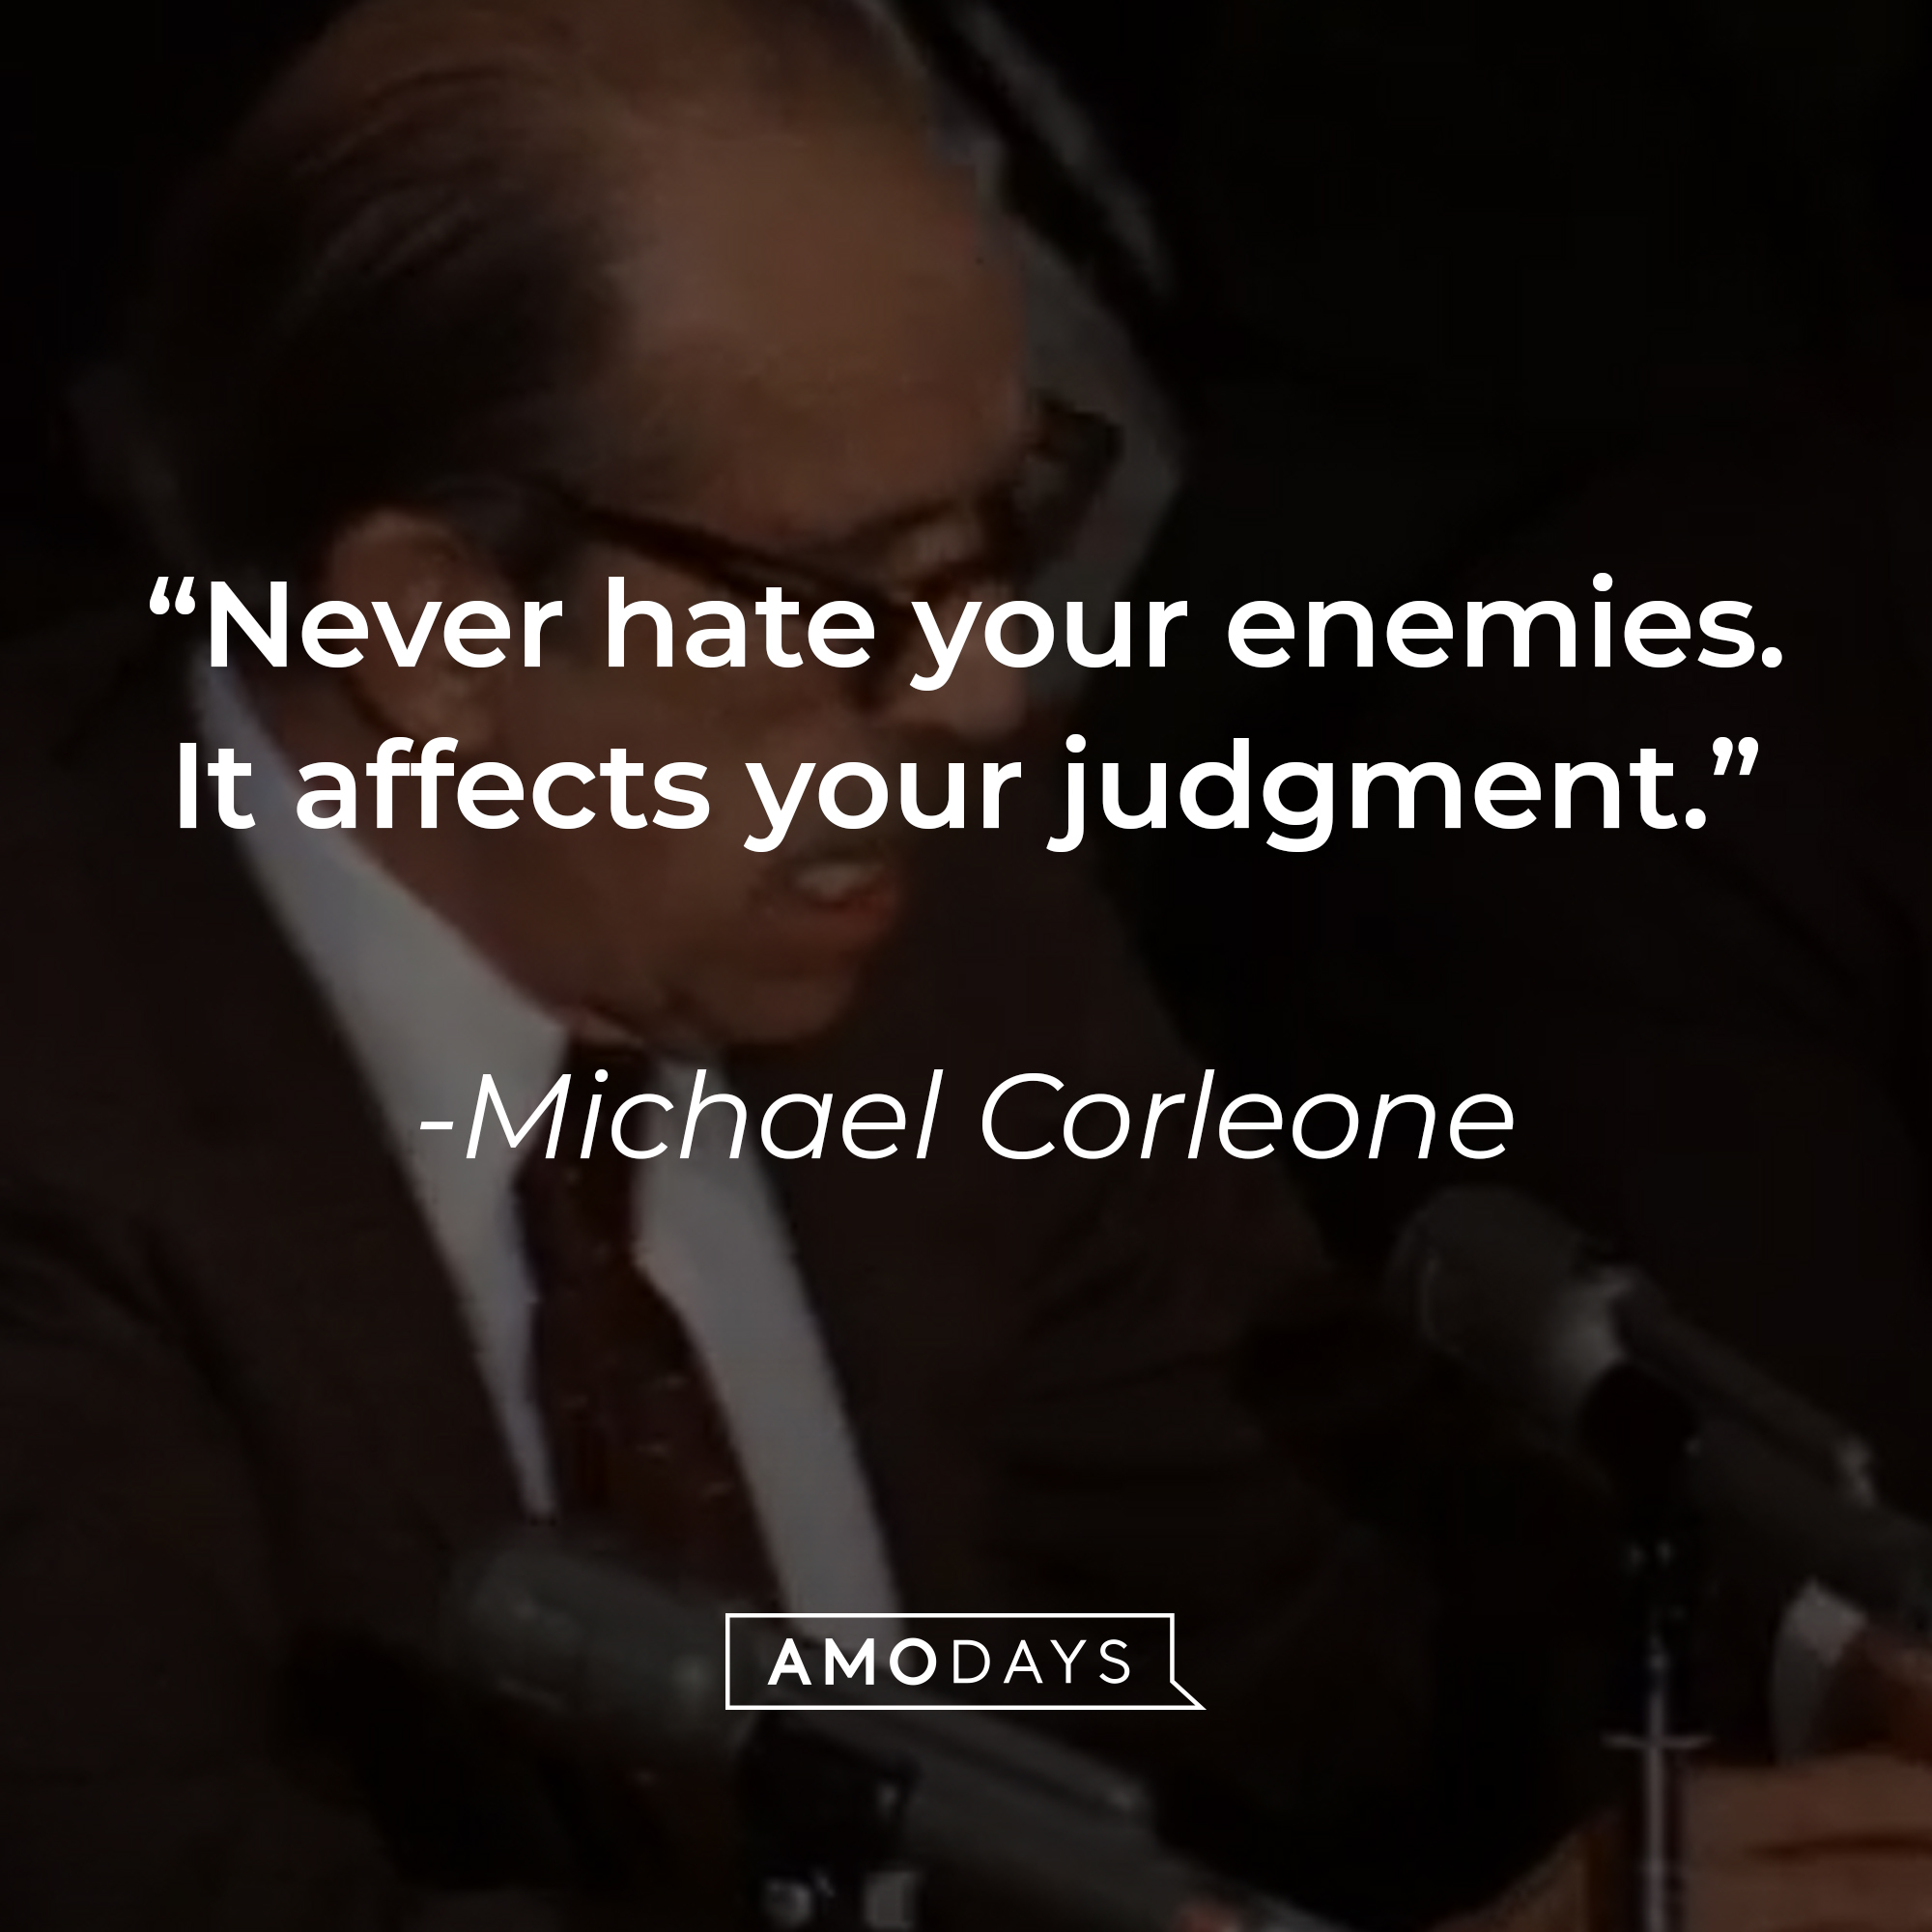 A photo of from "The Godfather II" with the quote, "Never hate your enemies. It affects your judgment." | Source/YouTube/paramountmovies